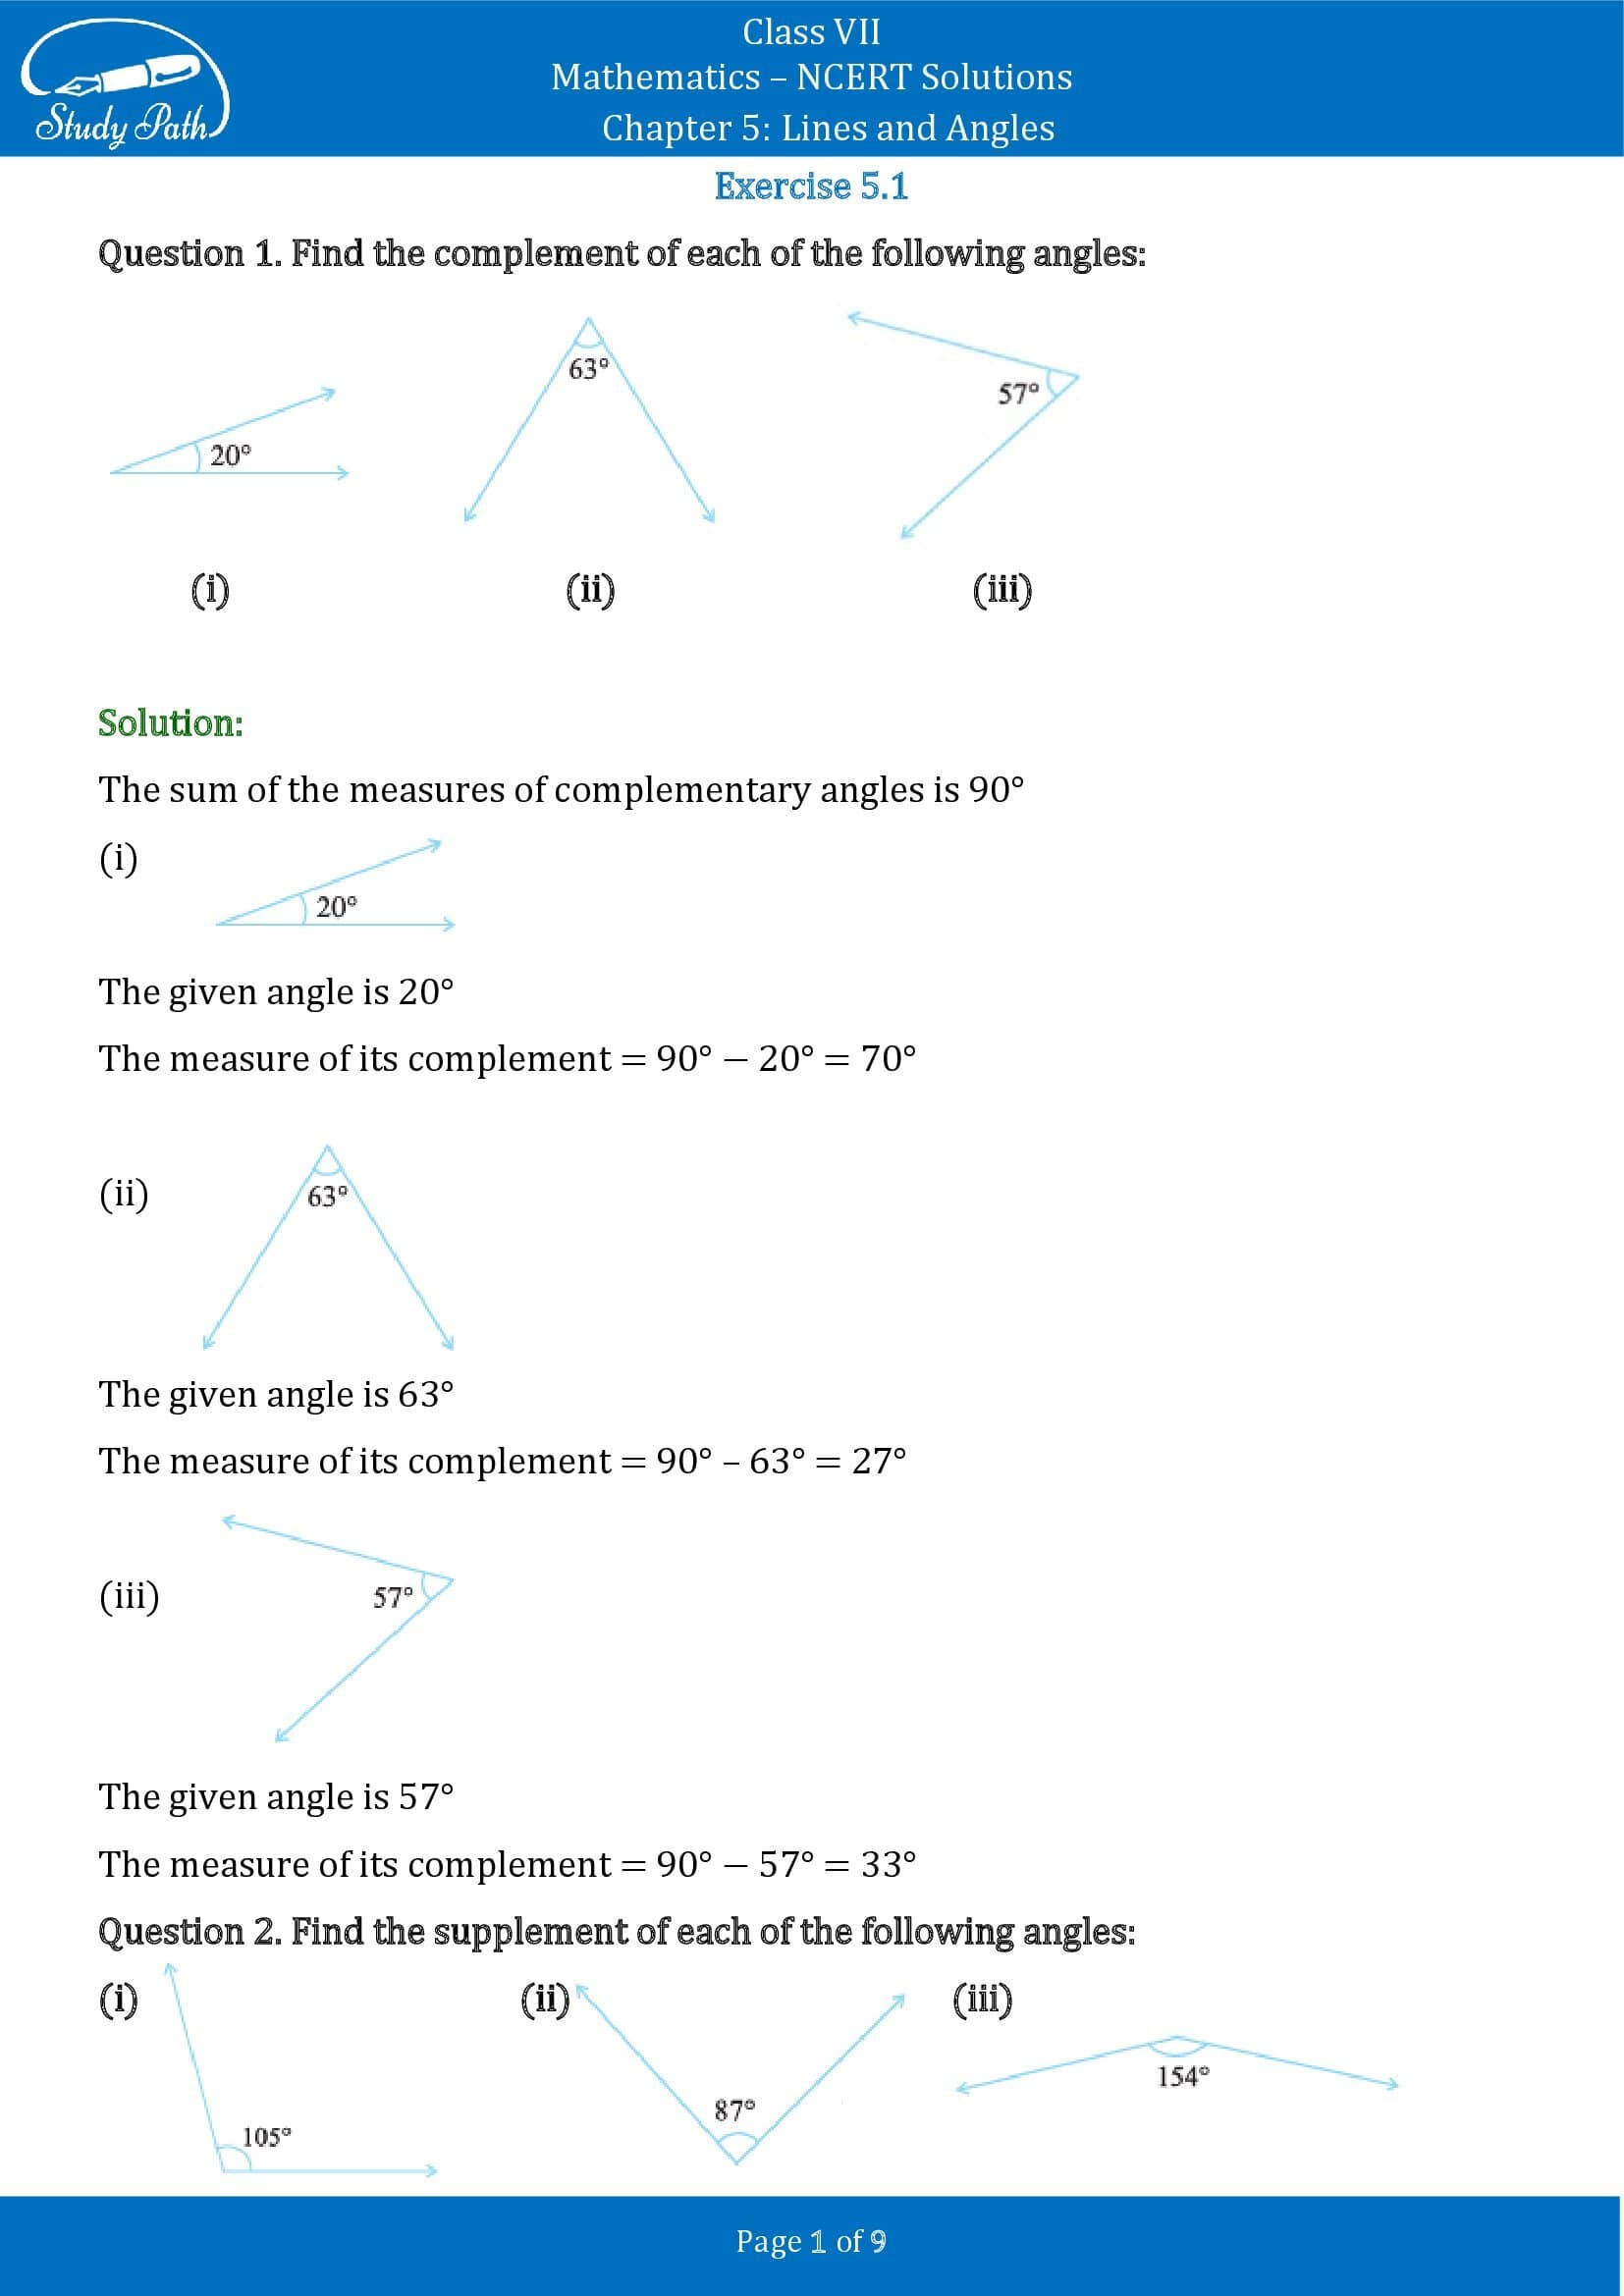 NCERT Solutions for Class 7 Maths Chapter 5 Lines and Angles Exercise 5.1 00001